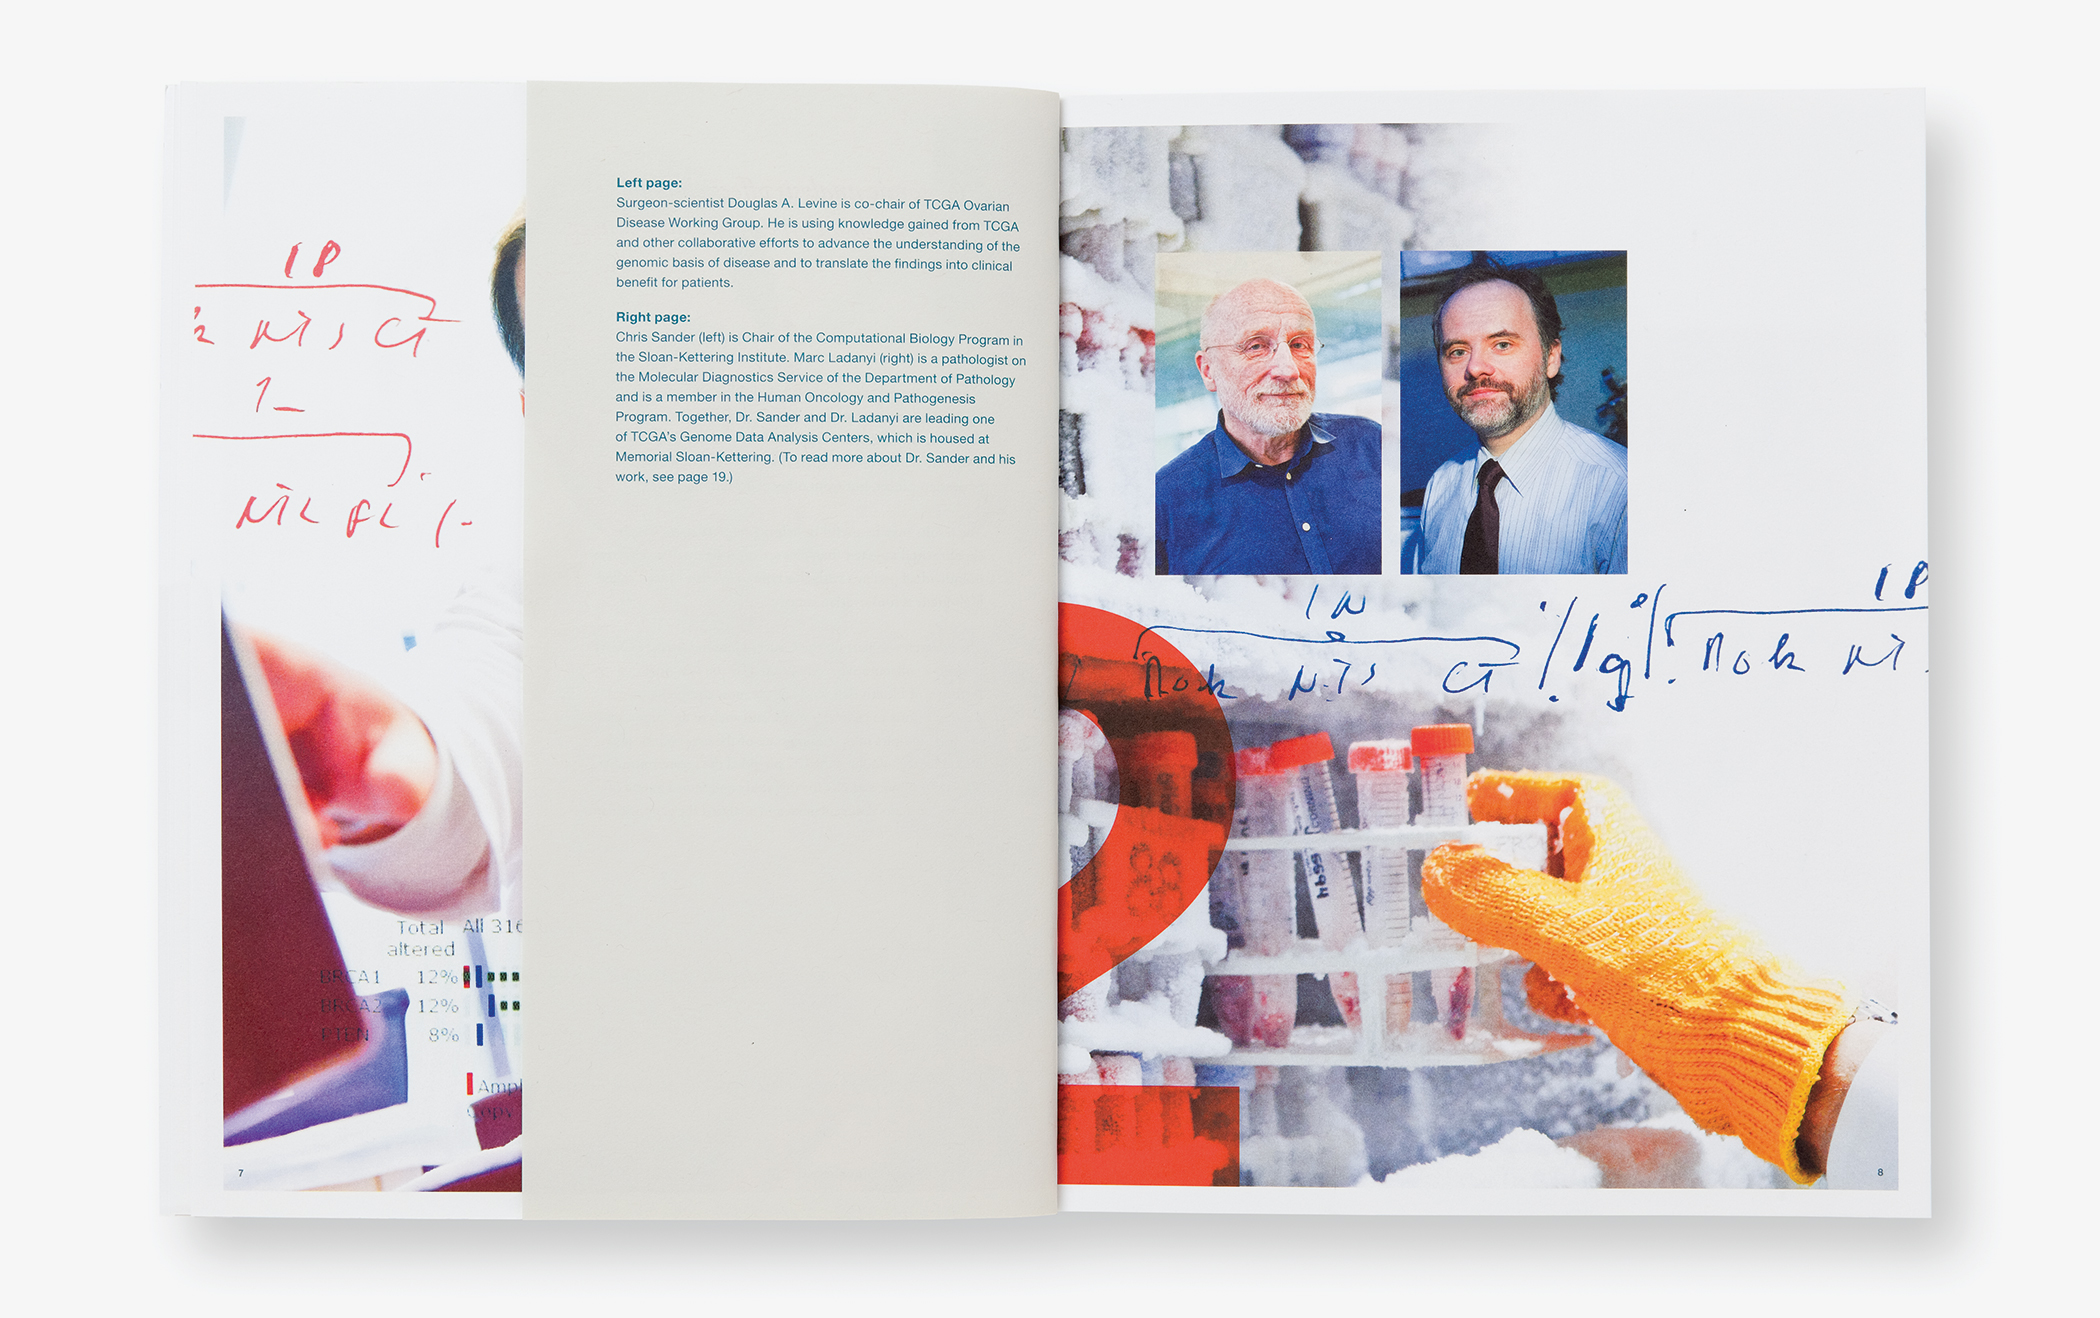 Headshots of doctors and images from a medical lab in the Memorial Sloan-Kettering 2011 annual report.